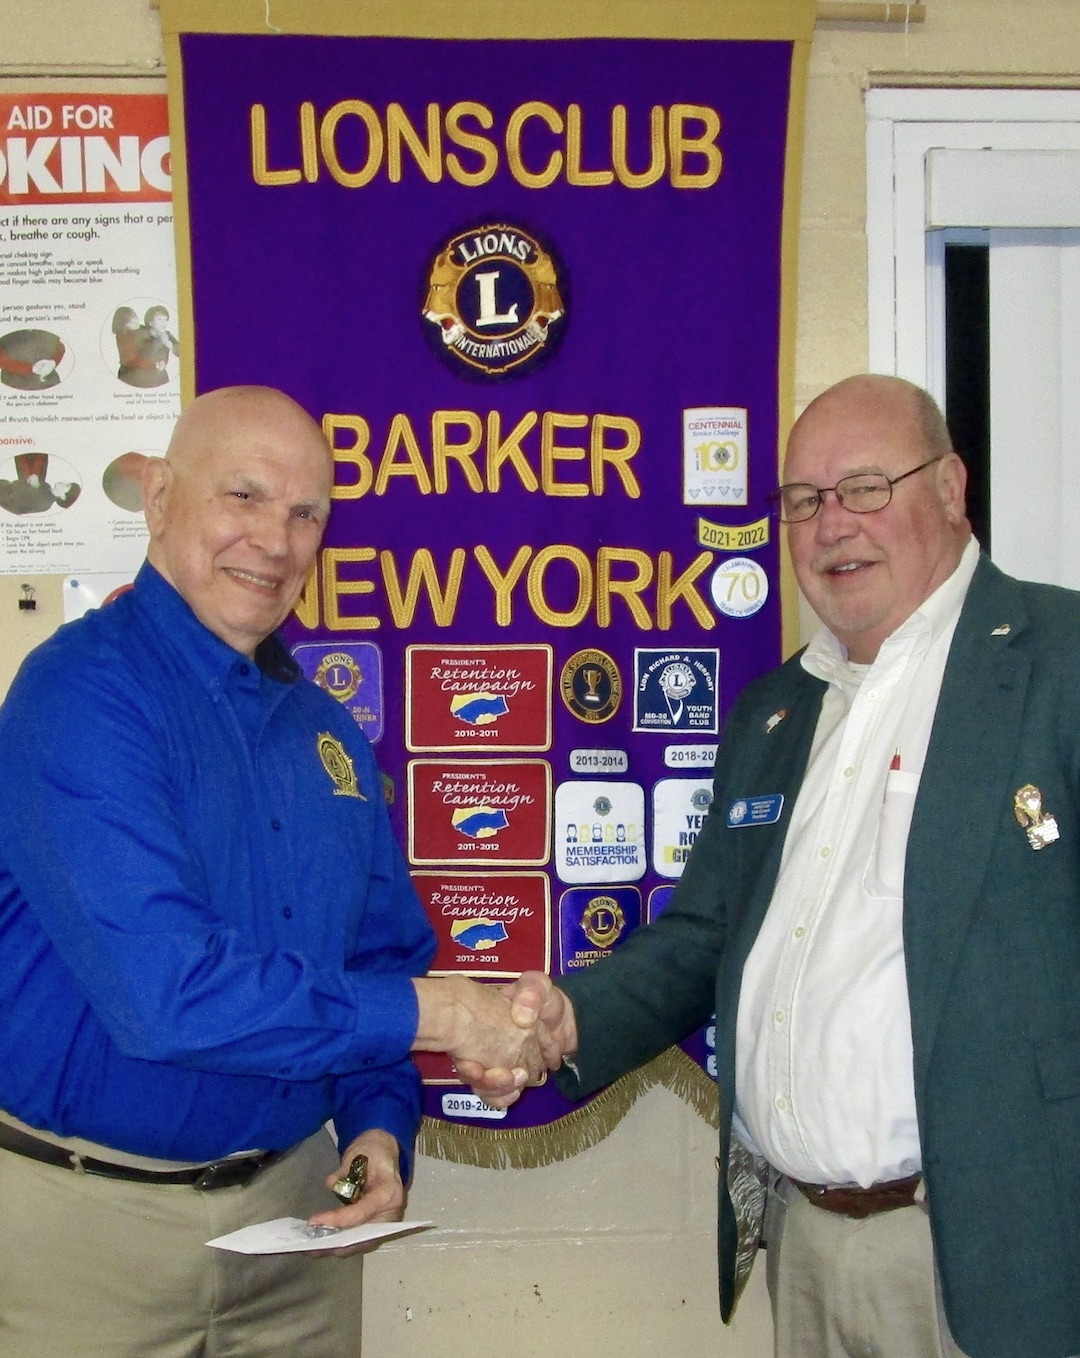 Grand Island Lion Tom Witkowski and Barker Lion President Dale Corwin. (Submitted)